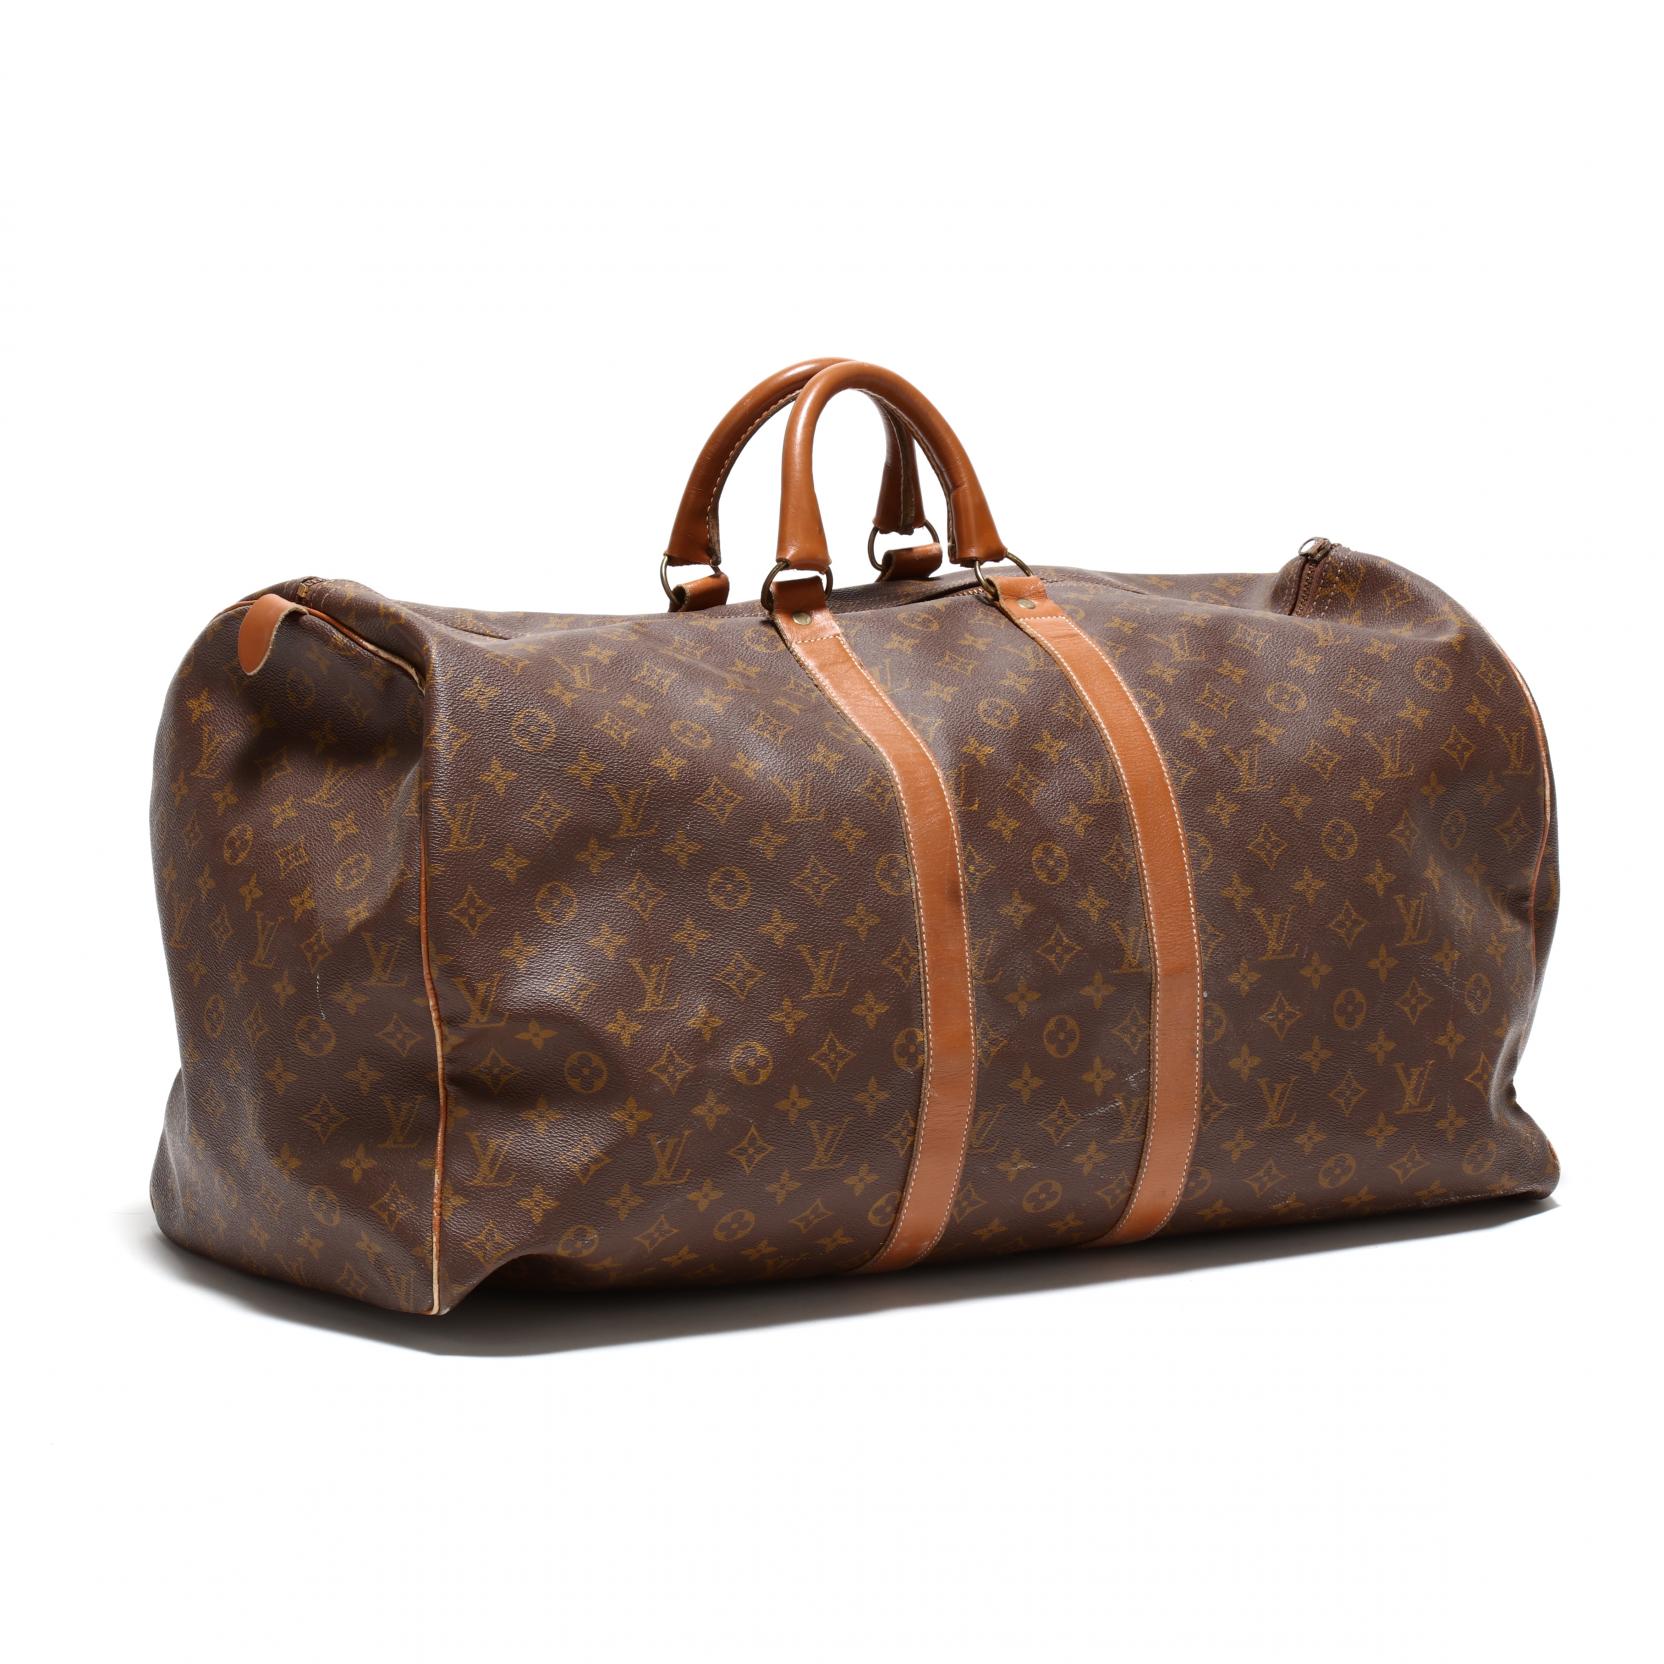 Sold at Auction: LOUIS VUITTON Keepall 60 Bandouliere LV Duffle Bag